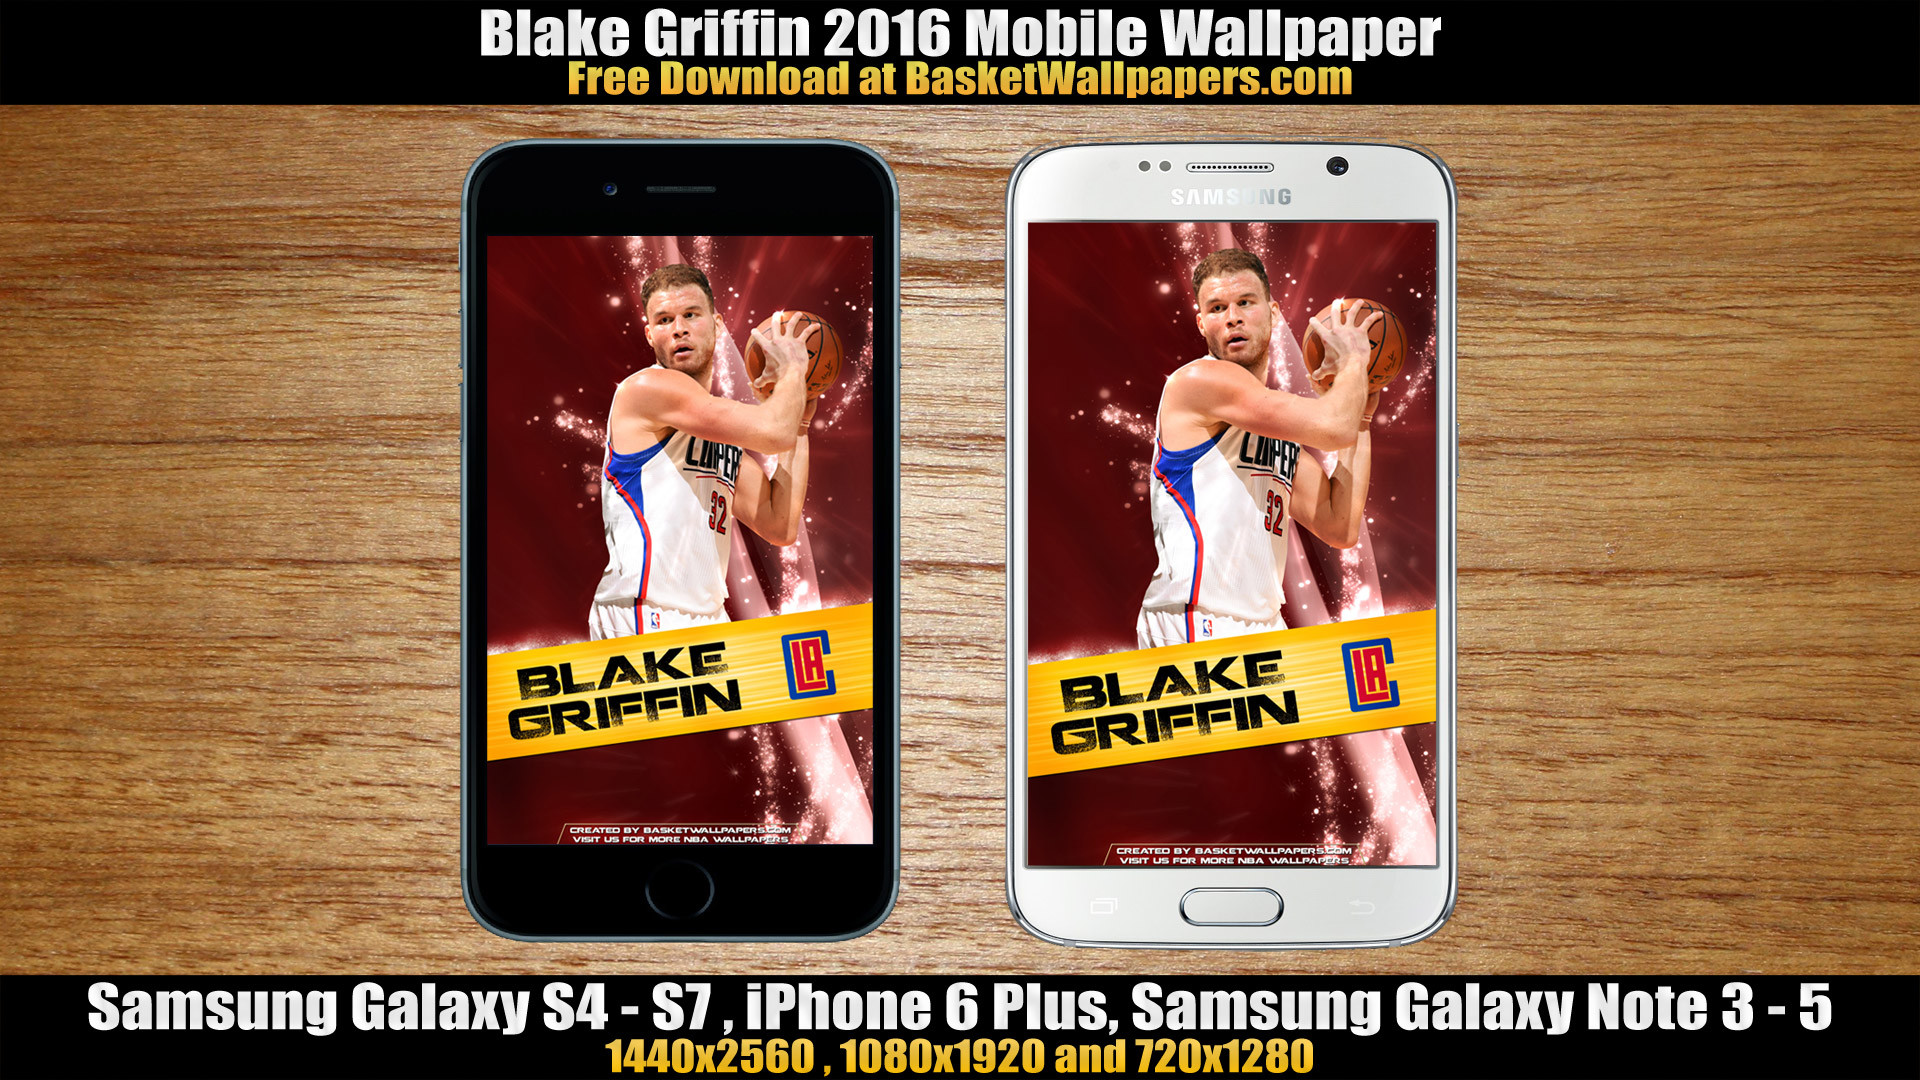 1920x1080 Blake Griffin Los Angeles Clippers 2016 Mobile Wallpaper